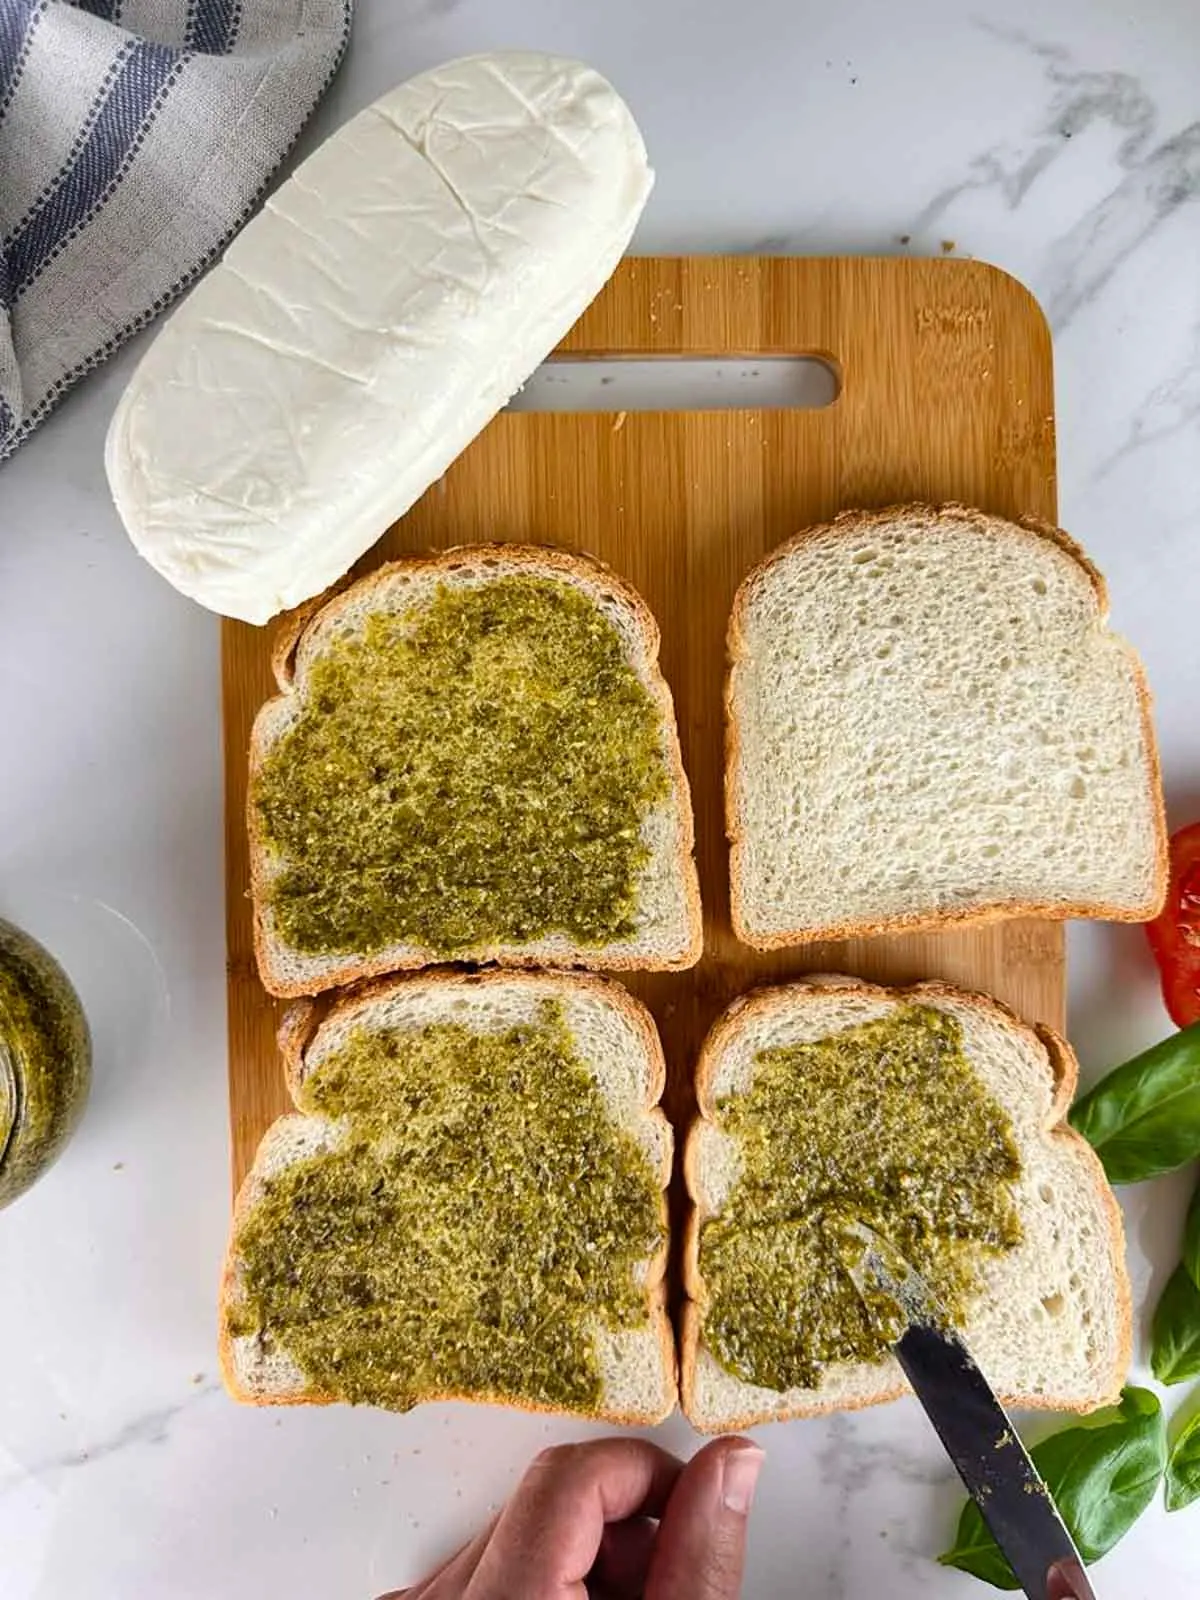 Spread one side of each slice of bread with pesto.